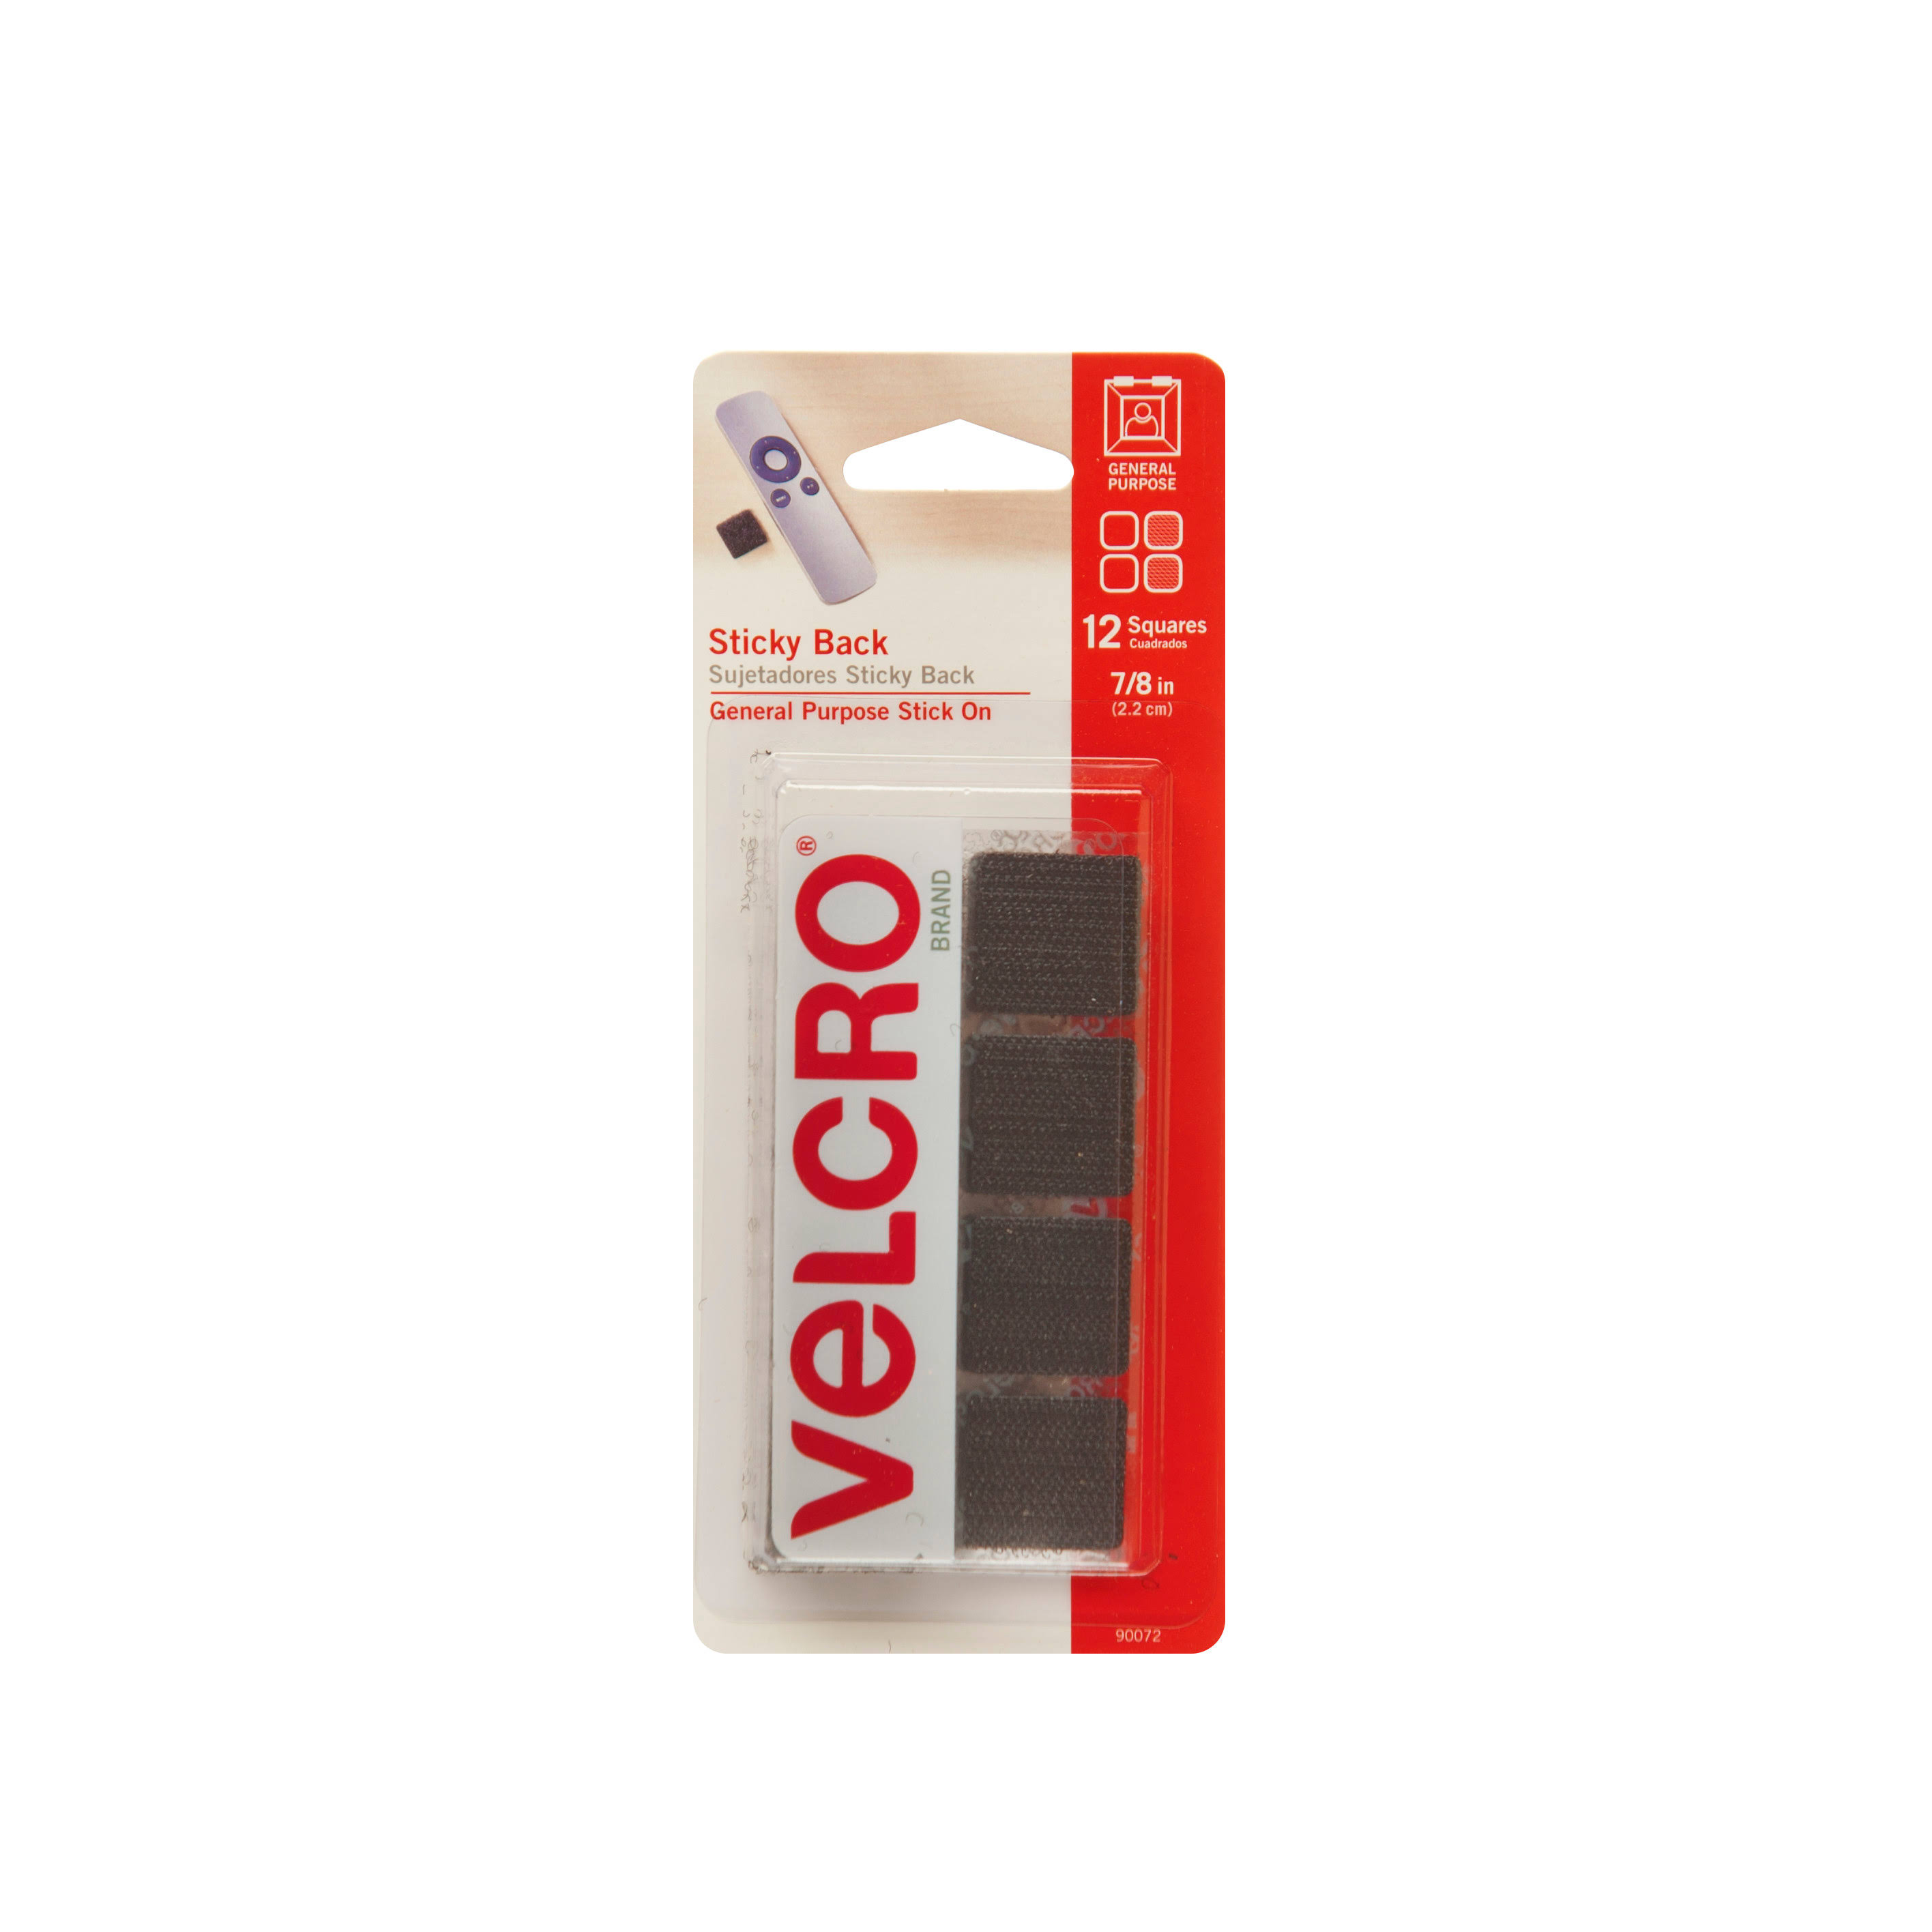 Velcro Sticky-Back Hook and Loop Square Fasteners on Strips - 7/8", Black, 12pc